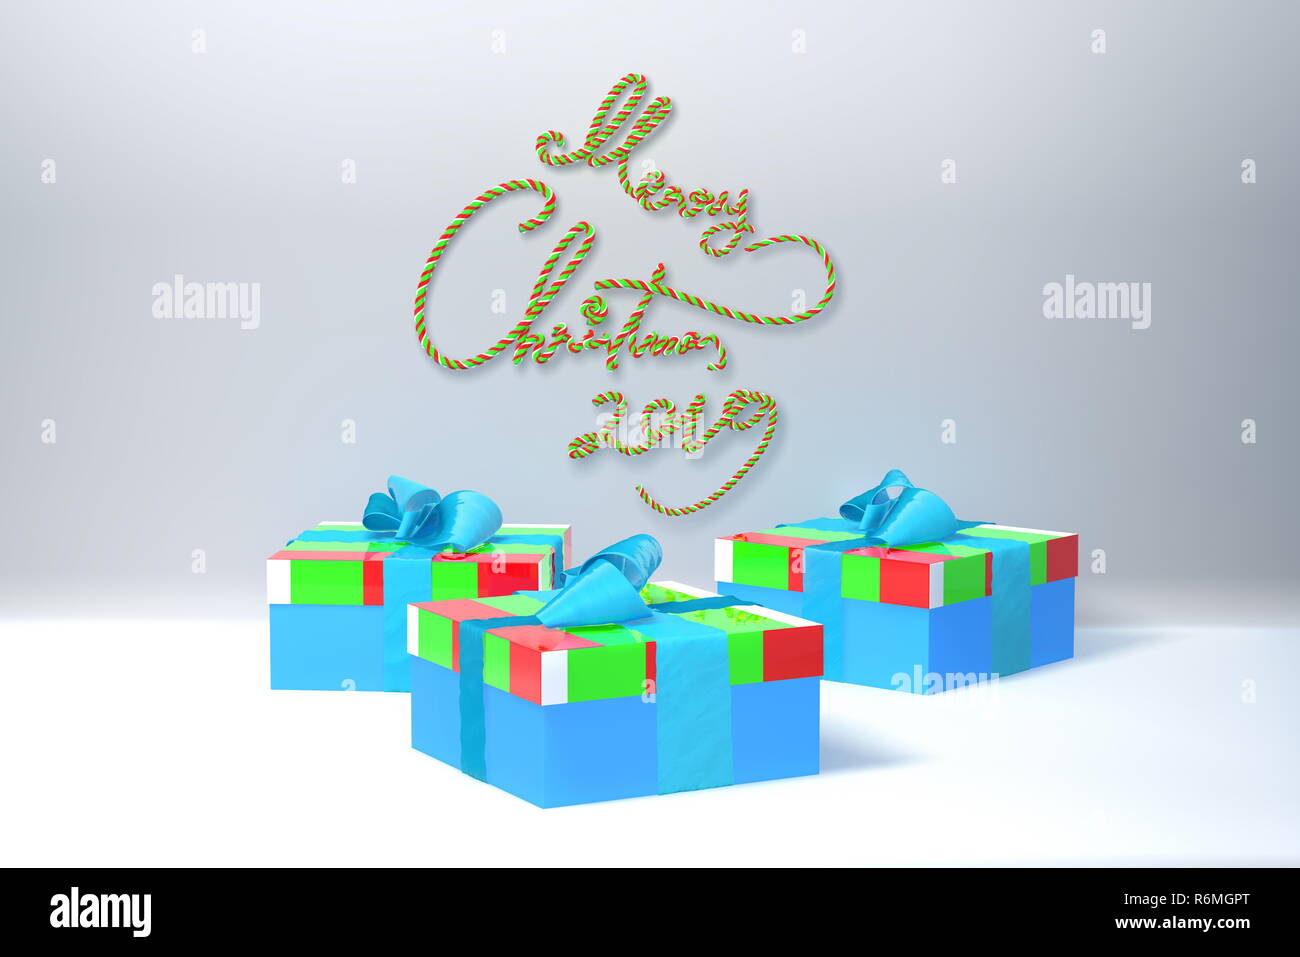 Merry Christmas 2019 lettering written by ribbon on white wall and three present gift boxes with bows beside. 3d illustration Stock Photo